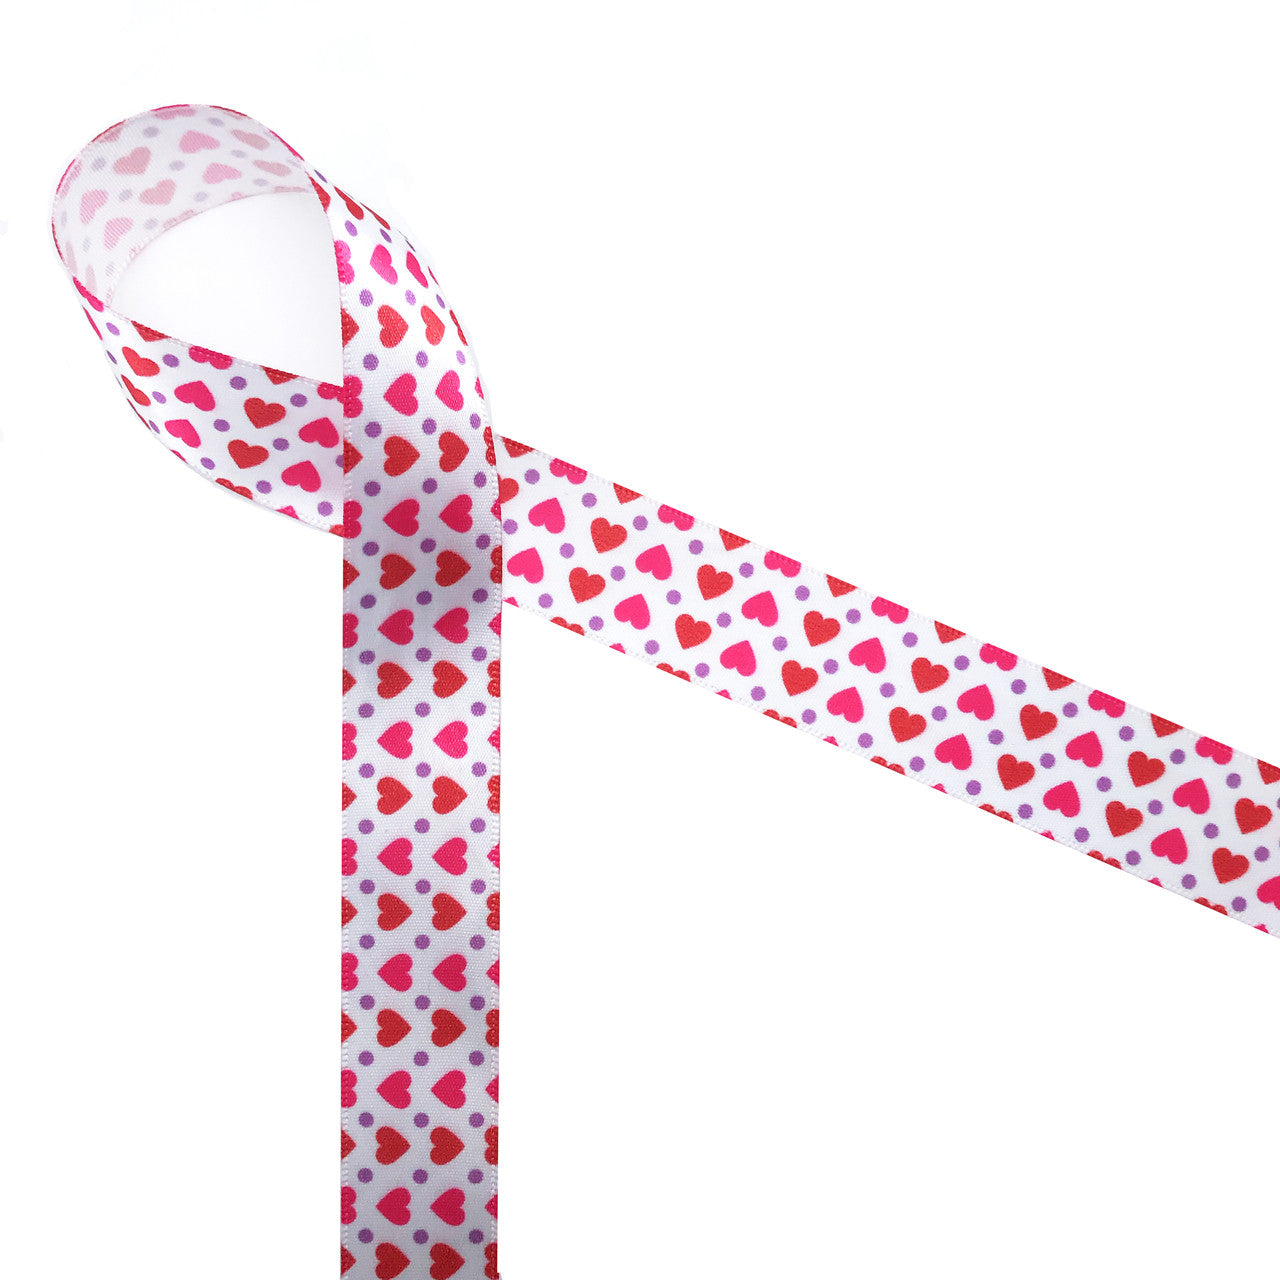 Hearts of hot pink and red mix with little lavender dots to create the sweetest Valentine design! Printed on 7/8" white single face satin, this ribbon will make your Valentine feel extra special!